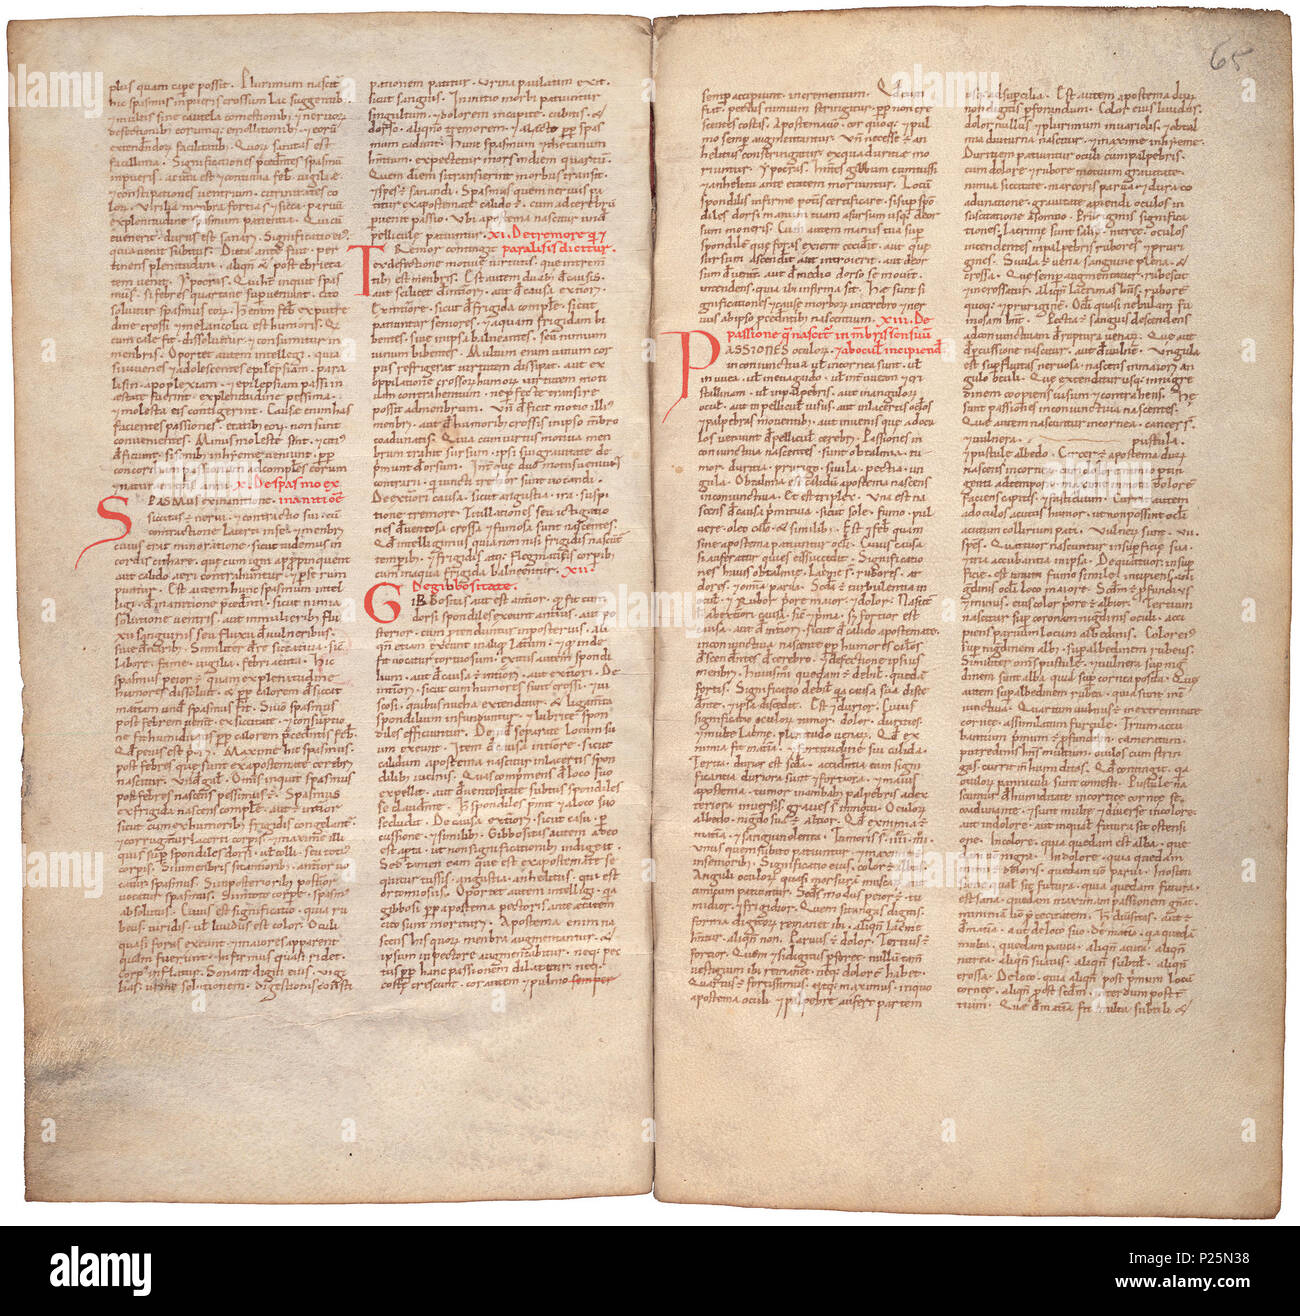 . Pantegni pars prima theorica (lib. I-X) - folios 064v (left) and 065r (right)  .  Lefthand side folio 064v; righthand side folio 065r from an 11th century copy of the Liber pantegni. This is the earliest known copy (prior to 1086) of the Liber pantegni, made at Monte Cassino under the supervision of Constantine the African. It is dedicated to Abbot Desiderius of Monte Cassino (1027-1087), before he became Pope Victor III. Read backgroud information in Dutch and in English. . Constantine the African (ca. 1010-1098/9) 176 Liber pantegni - KB 73 J 6 - folios 064v (left) and 065r (right) Stock Photo